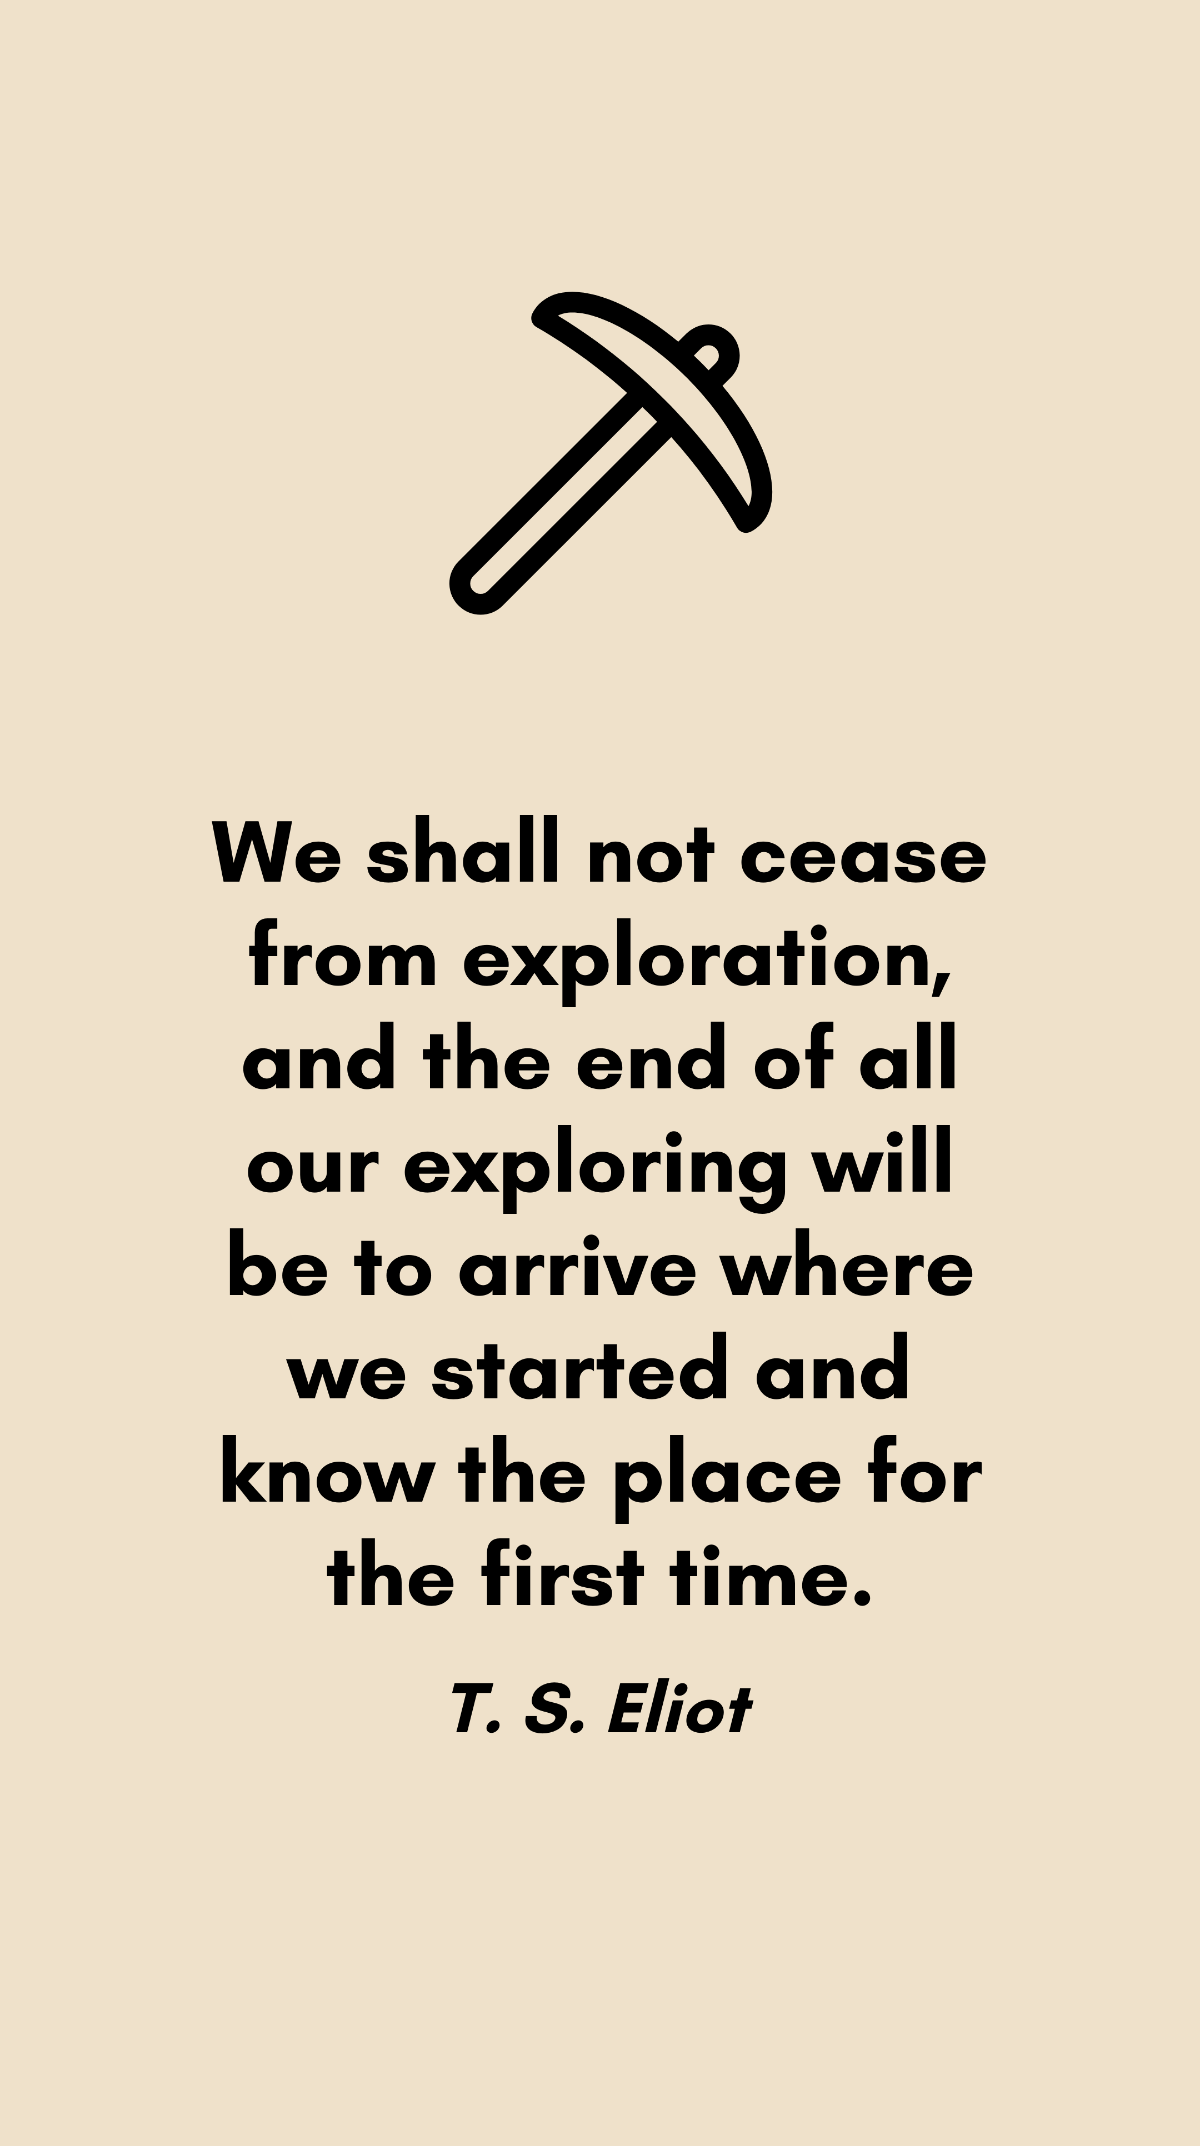 Free T. S. Eliot - We shall not cease from exploration, and the end of all our exploring will be to arrive where we started and know the place for the first time. Template